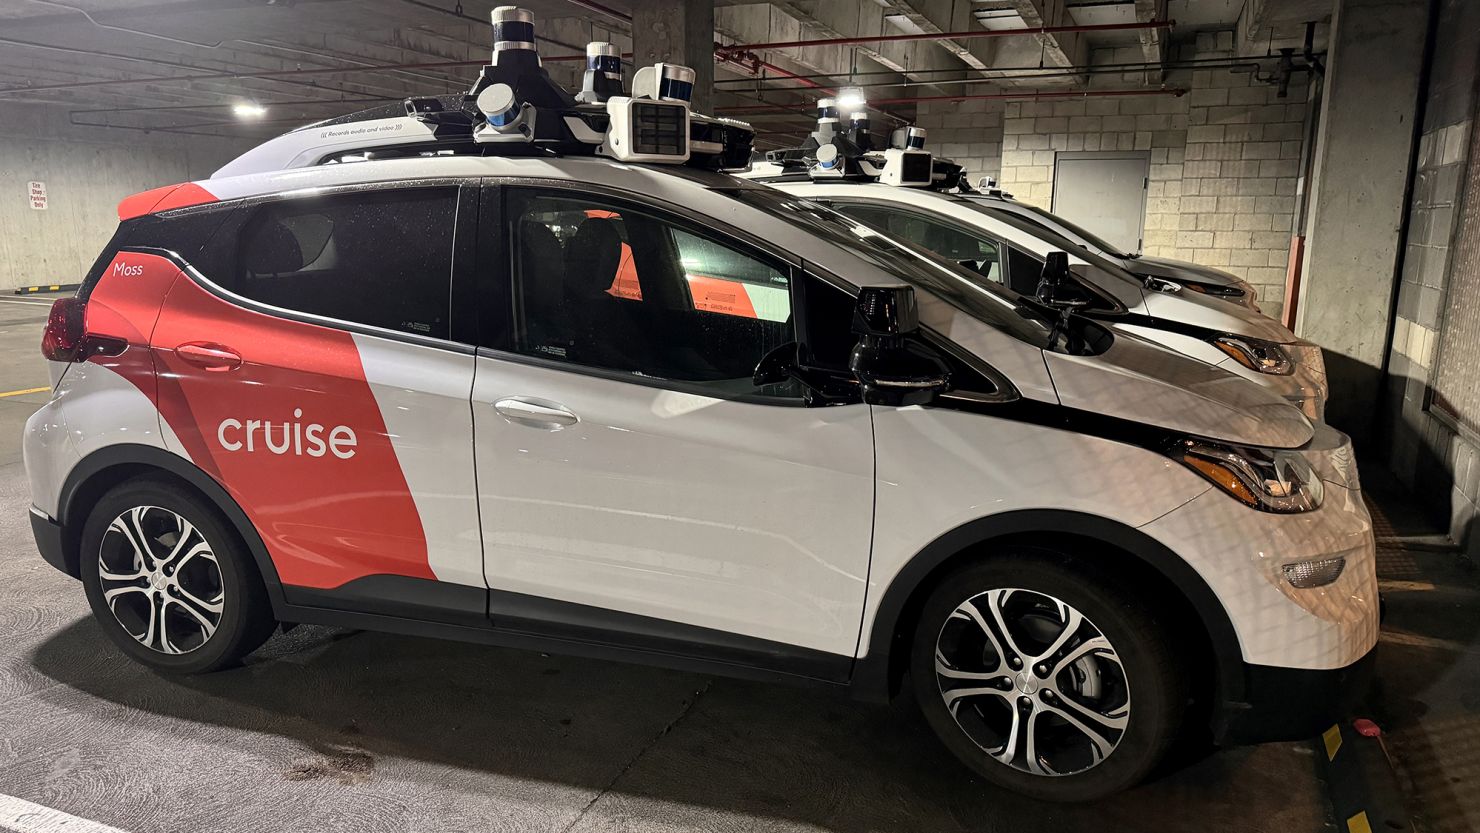 'Cruise' driverless robot taxis in a parking facility.